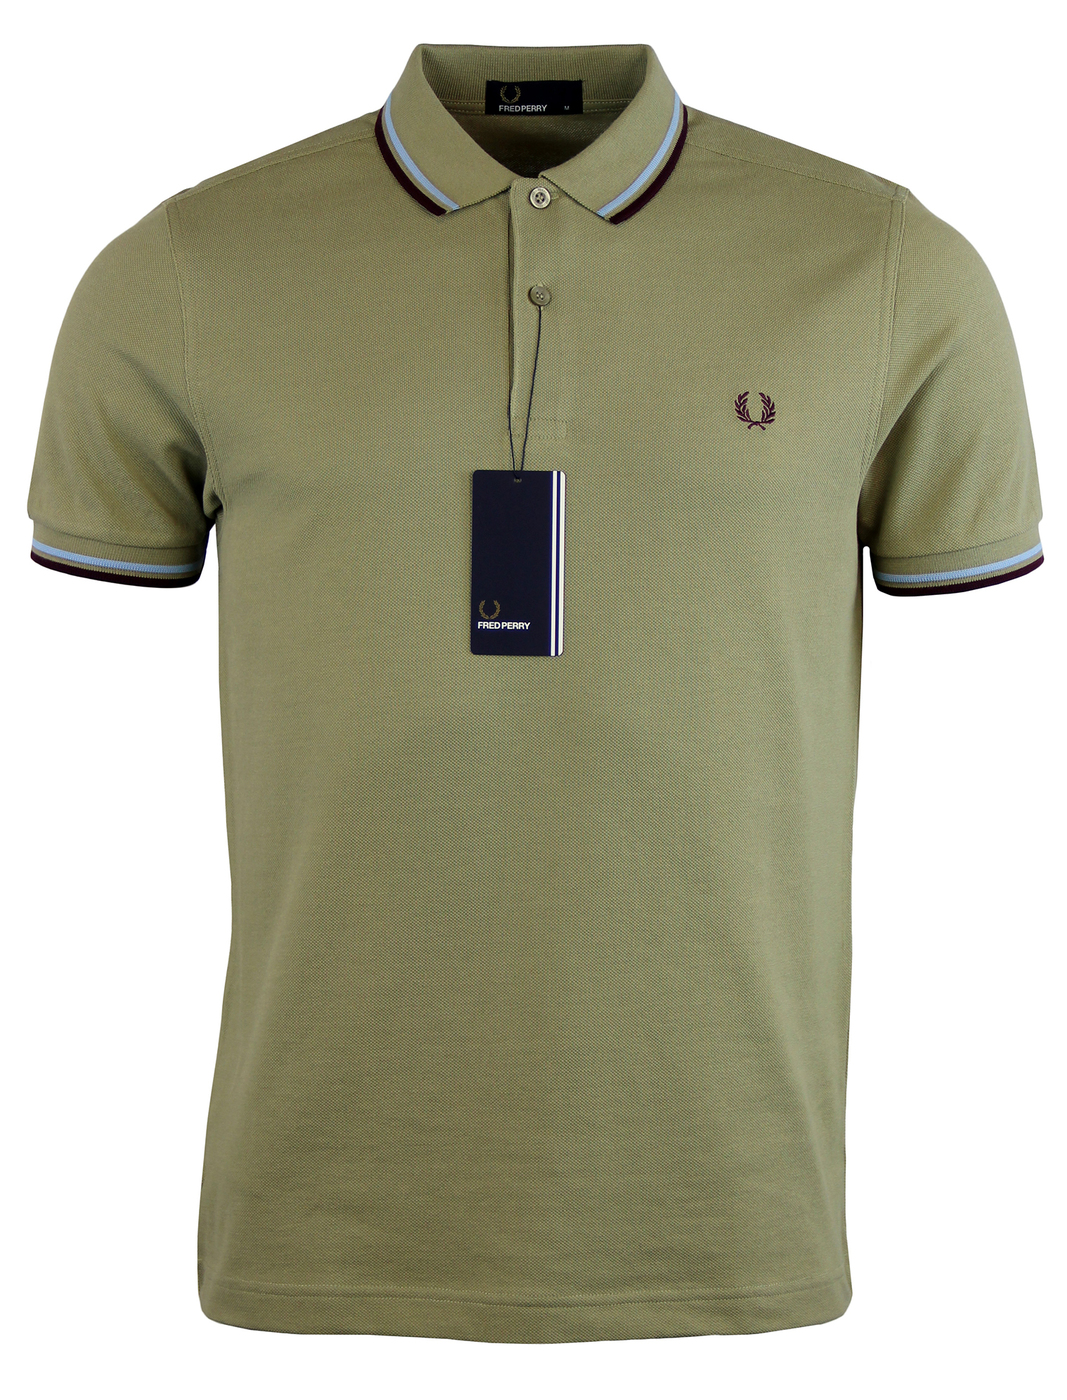 FRED PERRY M3600 Mod Twin Tipped Polo Shirt FG